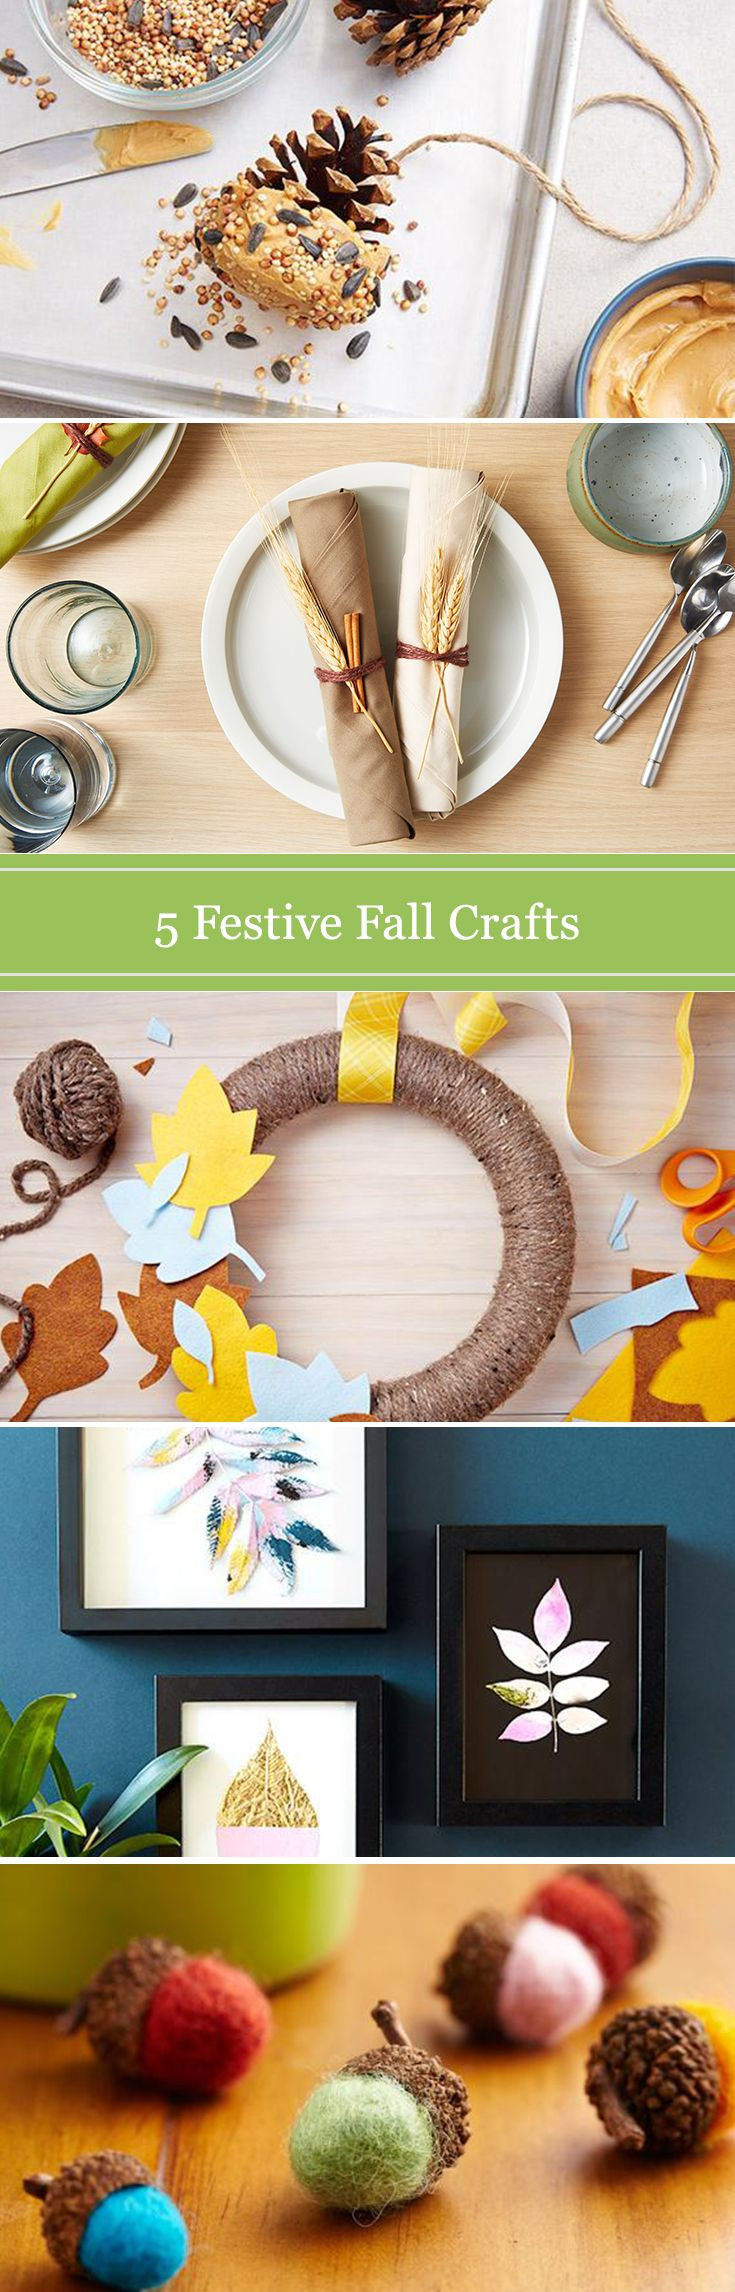 Easy Craft Projects For Adults
 51 best Craft Ideas for Adults images on Pinterest